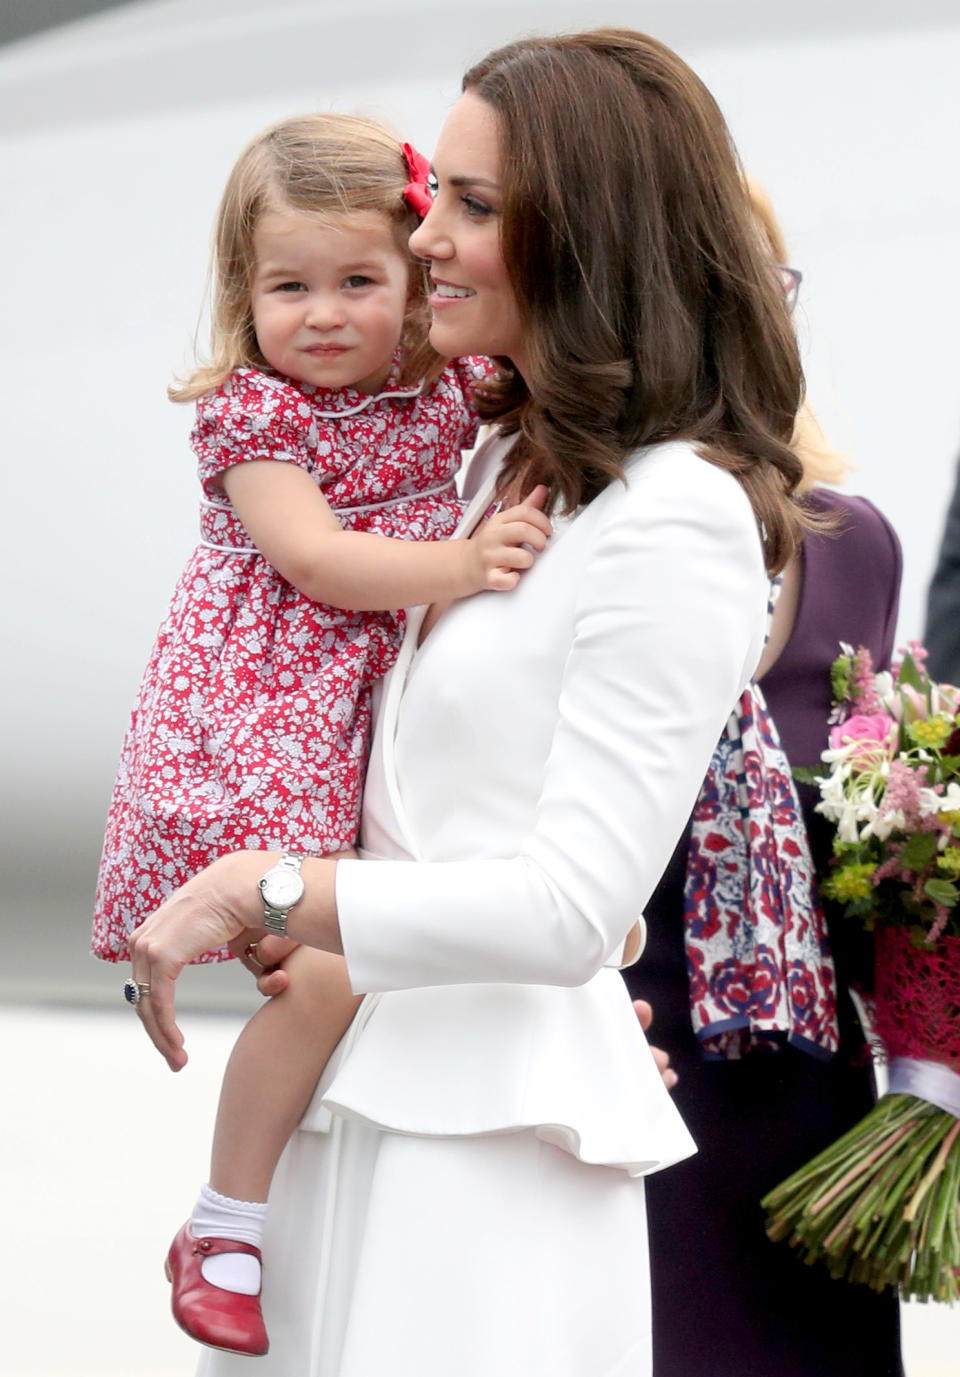 <p>Charlotte smiled for the cameras upon landing in Poland for a royal tour. The 2-year-old looked adorable in a red and white floral dress and matching Mary Janes while resting in mom's arms.</p>